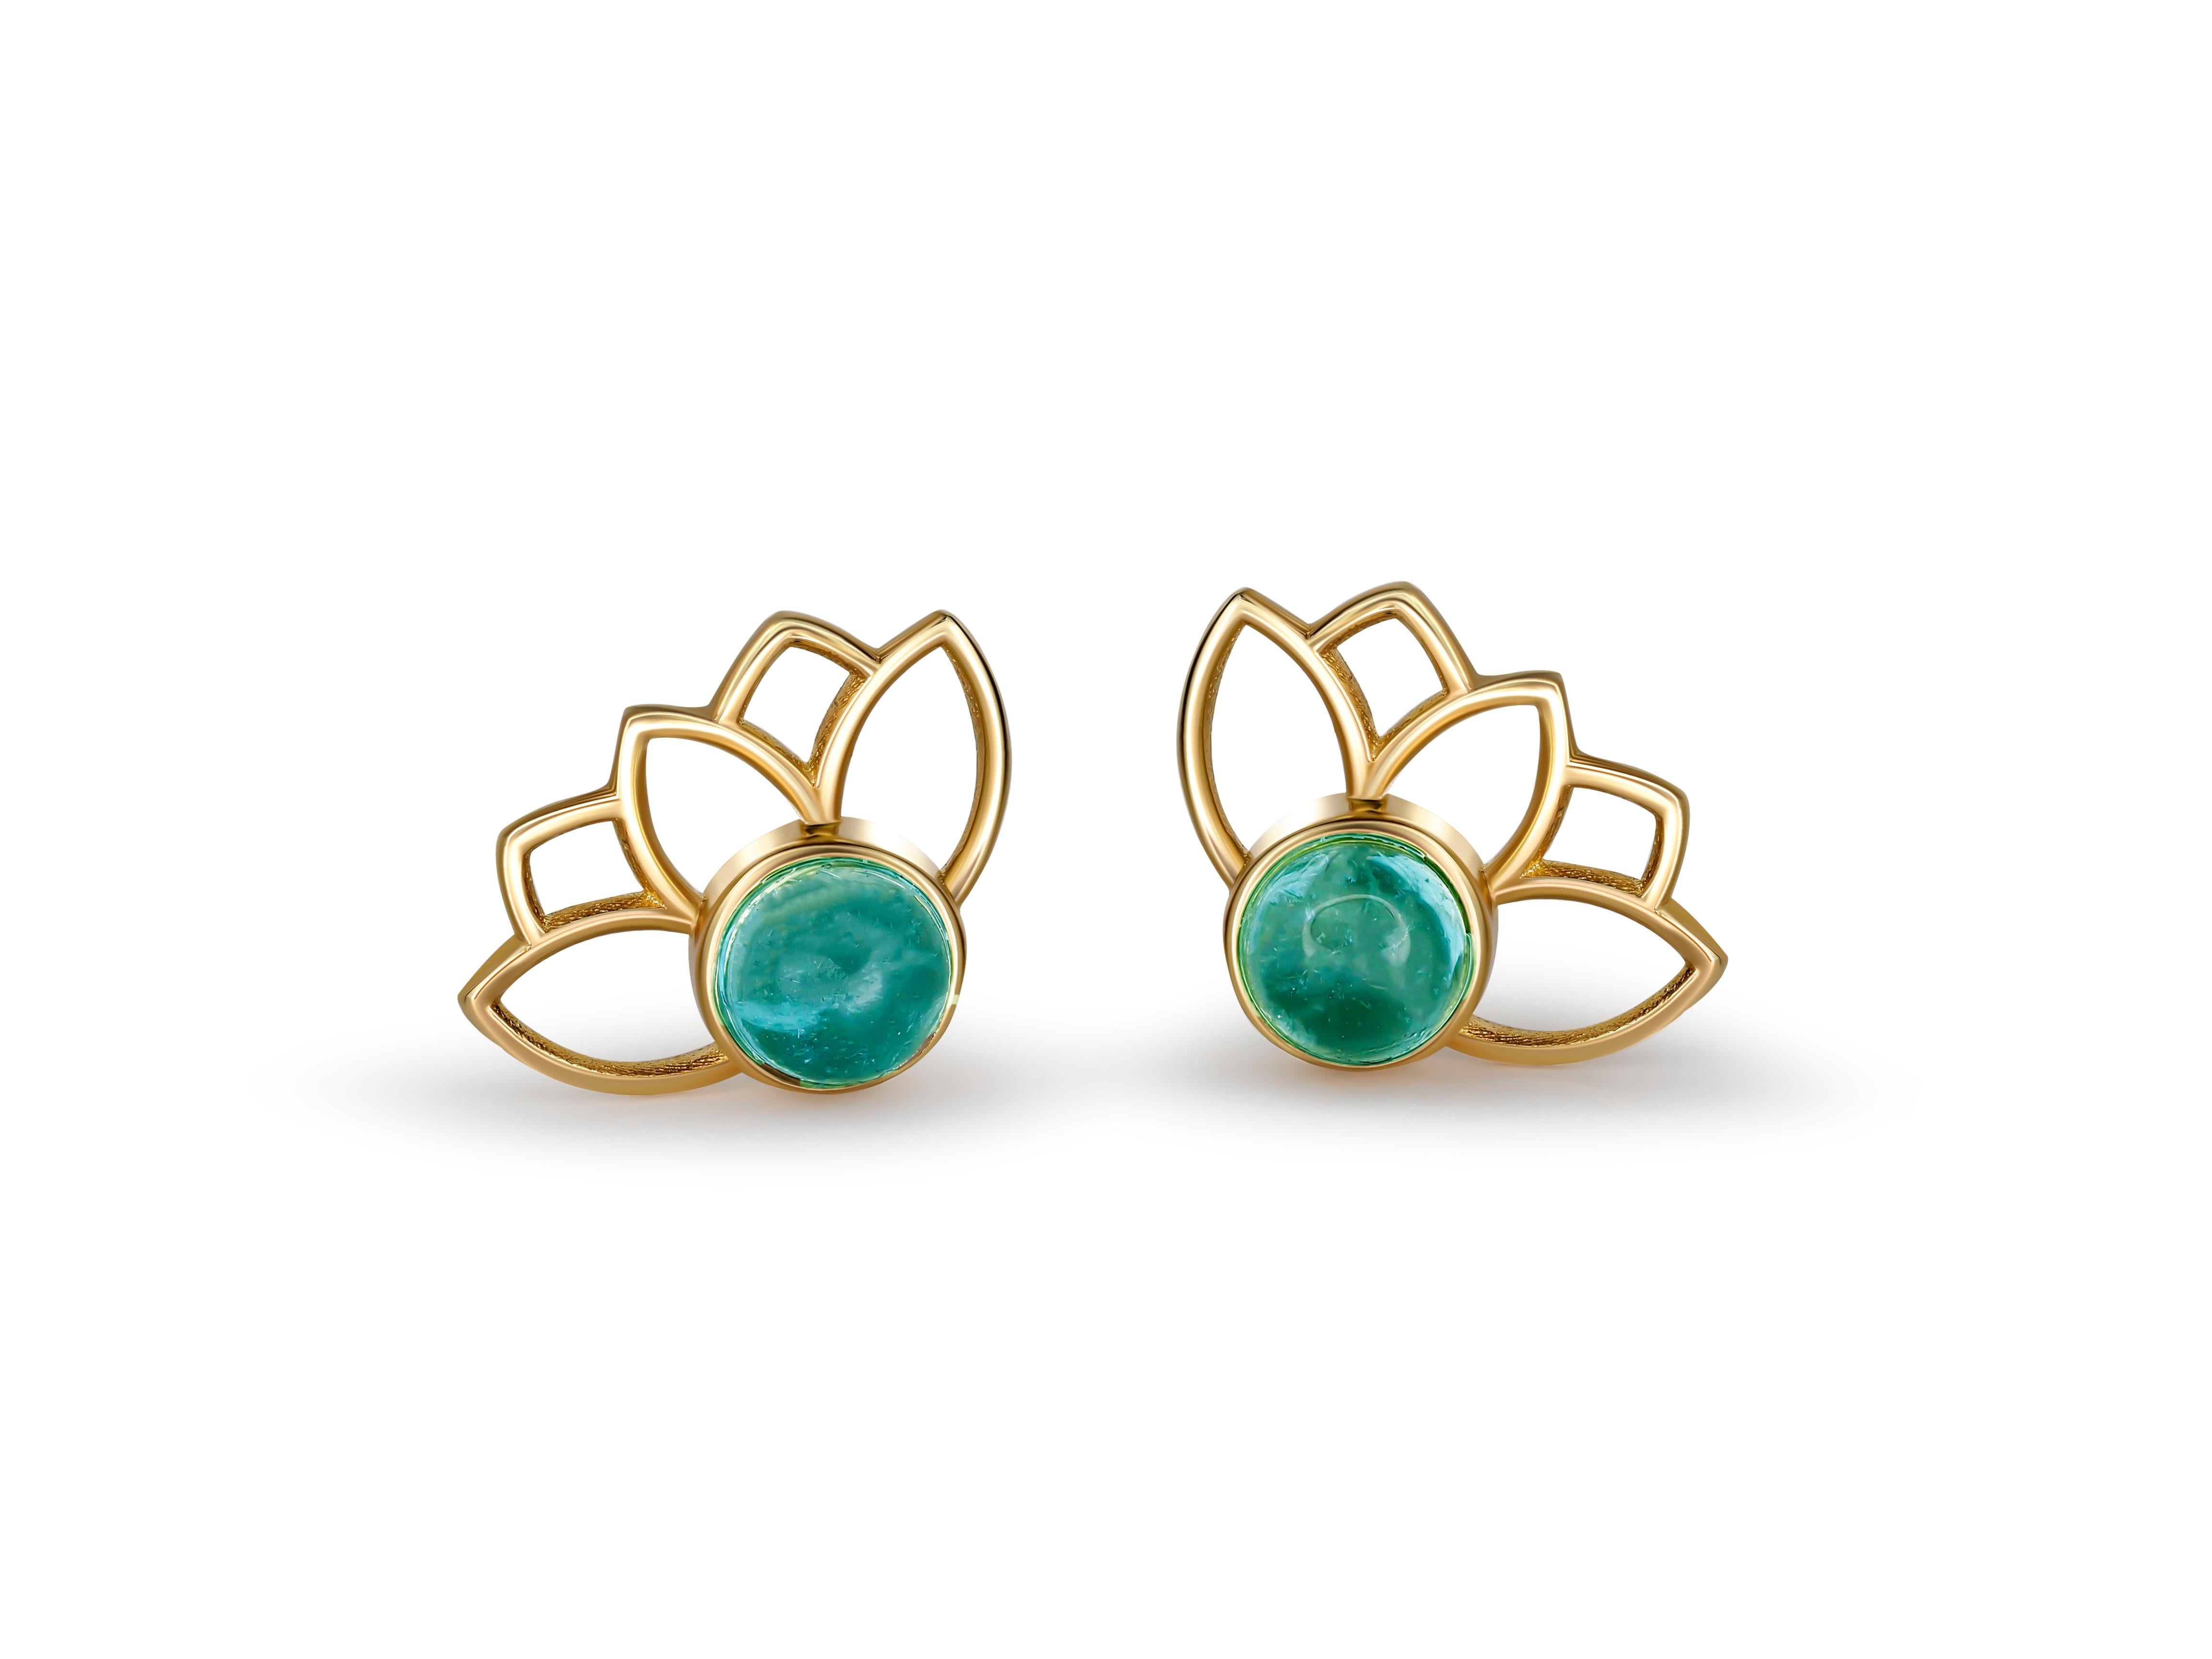 Lotus flower earrings studs in 14k gold. 

Aquamarine cabochon earrings. March birthstone earrings. Blue aquamarine gold earrings studs.

Metal: 14 karat gold
Weight: 1.2 g.
Size: 11.45 x 8.35 mm.

Set with genuine aquamarines: weight - 0.45 ct x 2